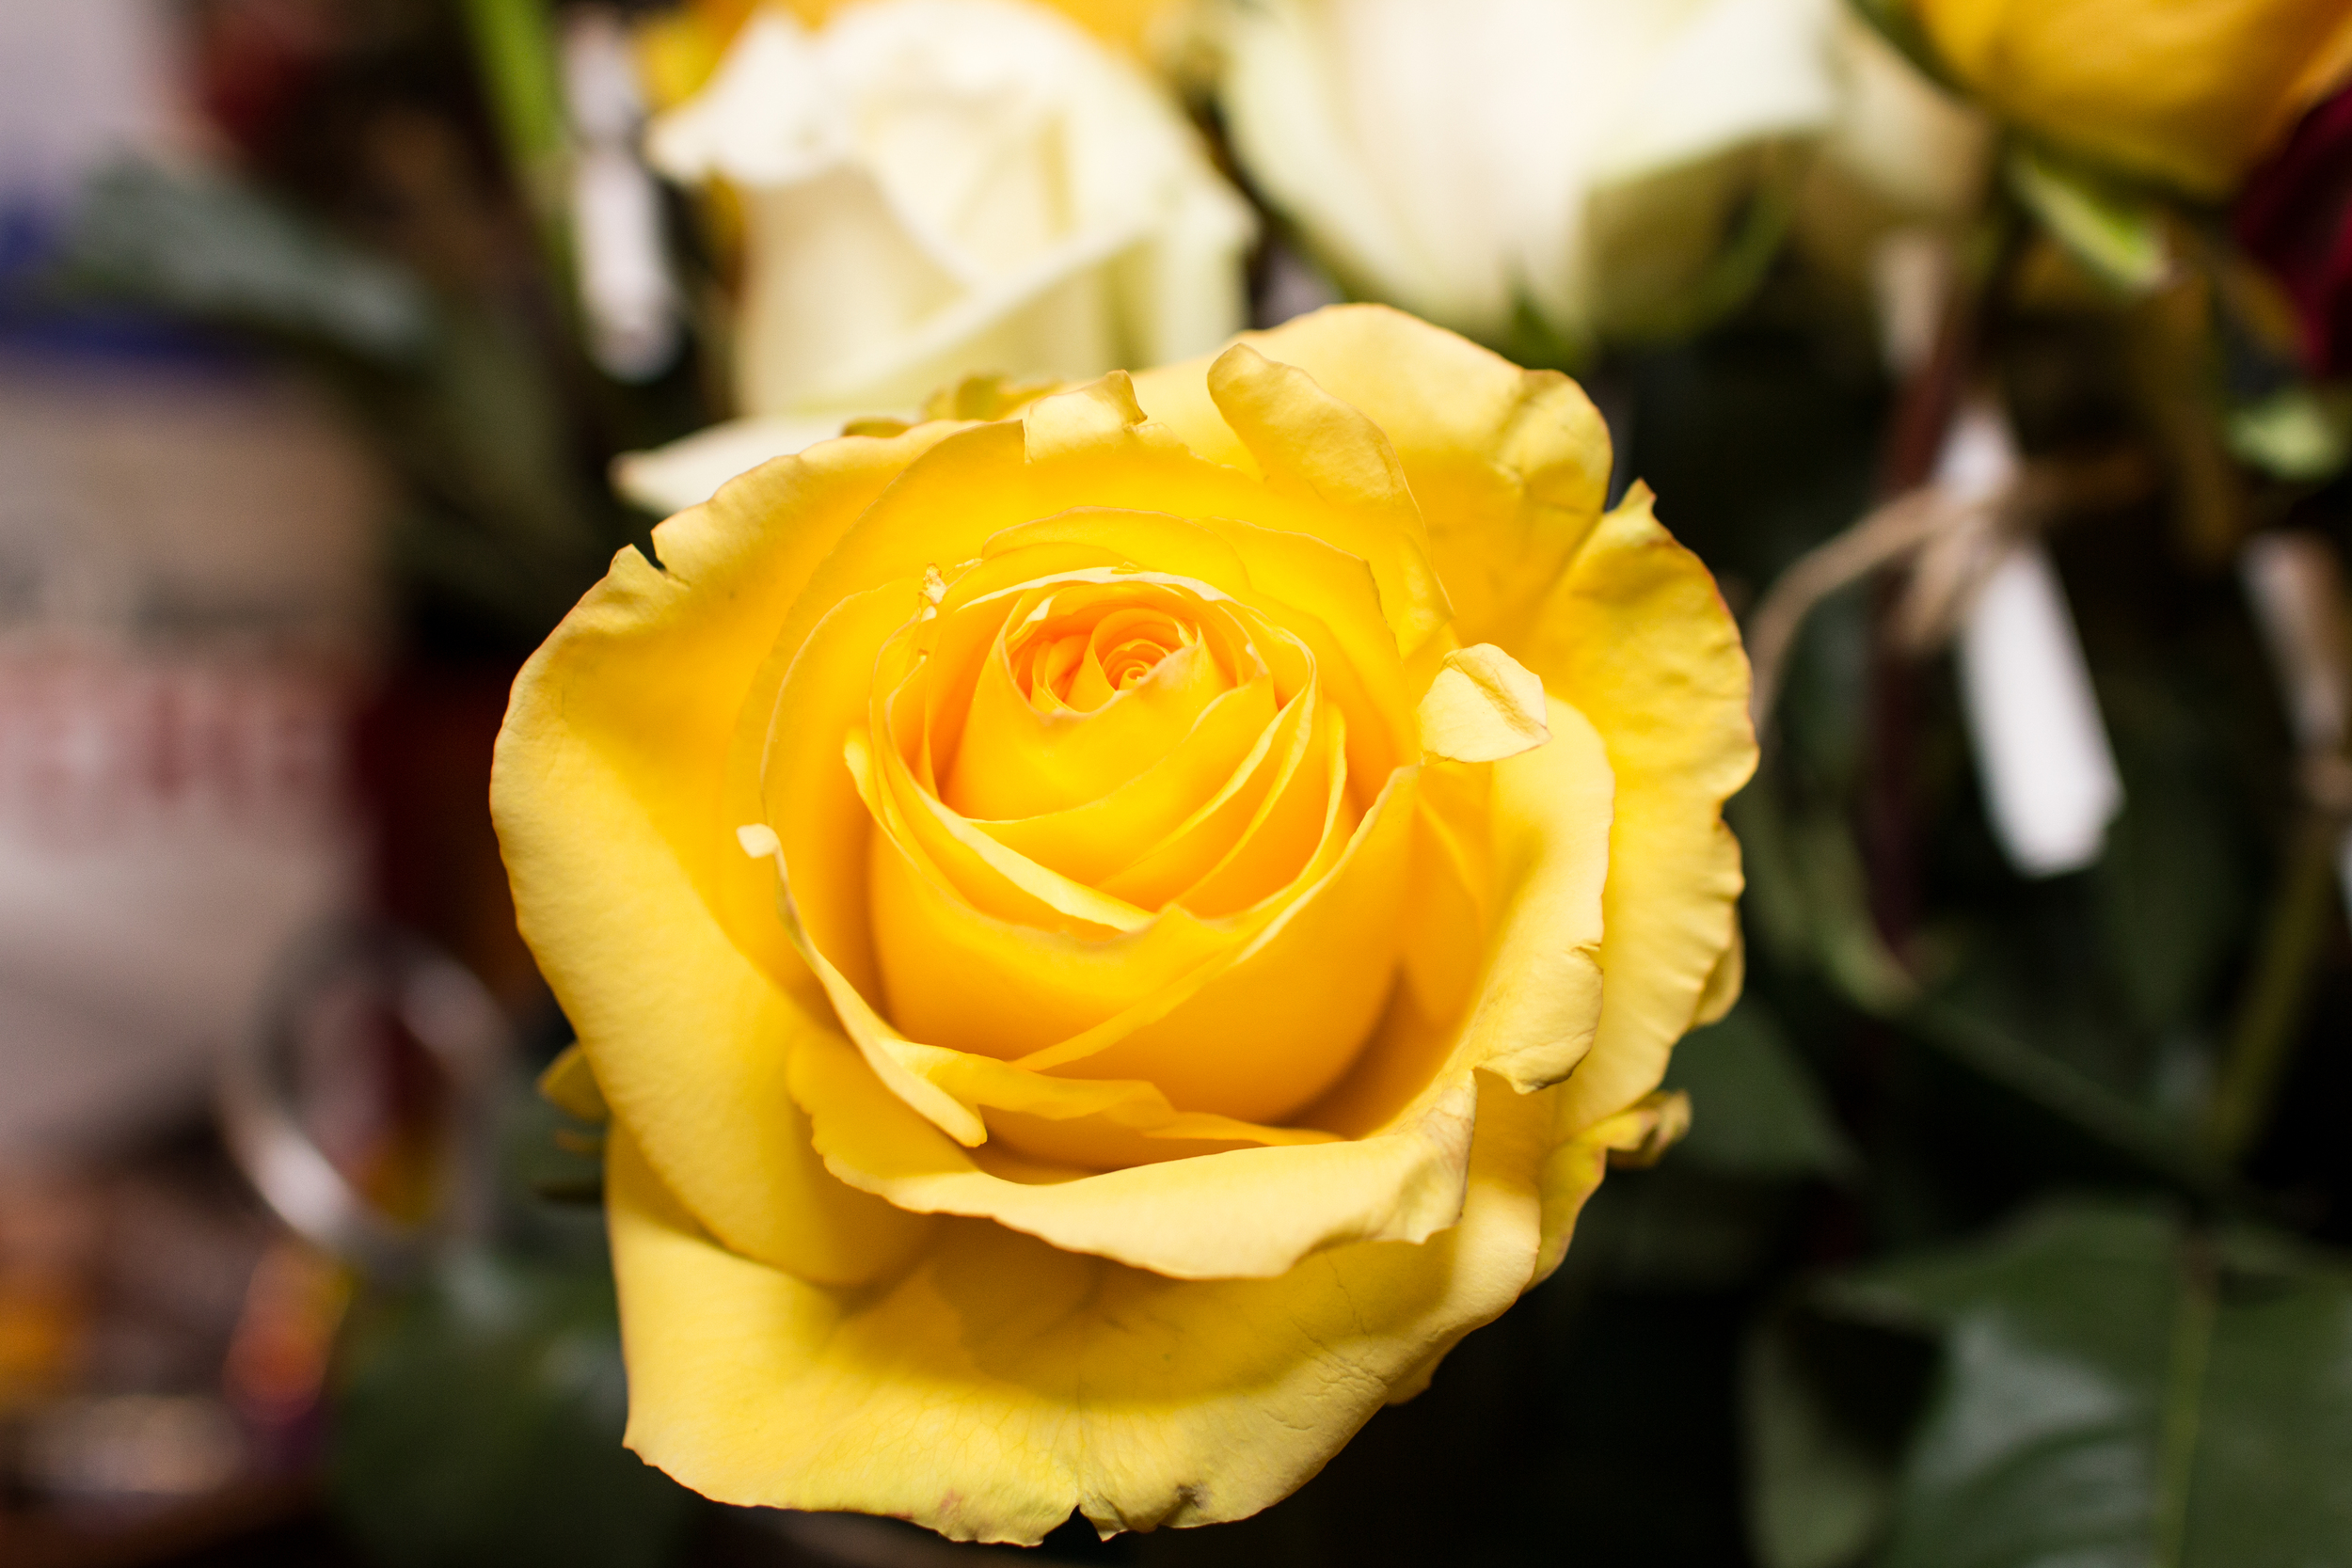 CFF_Annapolis_65_Roses_Charity_Photography-3.jpg